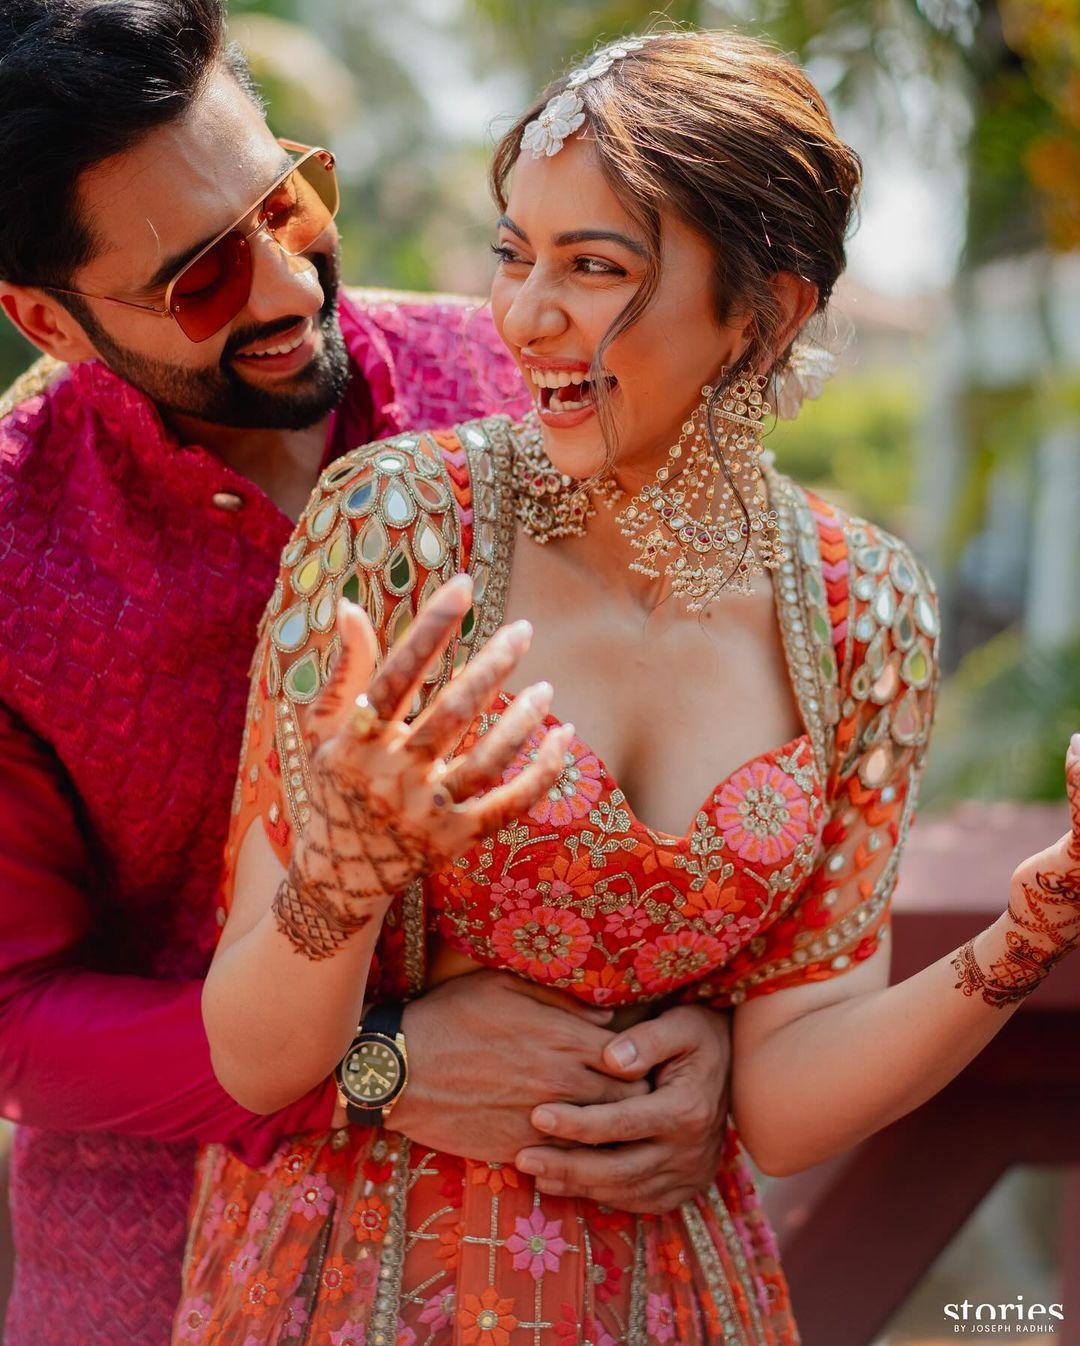 Rakul Preet Singh tied the knot with longtime beau Jackky Bhagnani on February 21 in Goa. The ceremony was attended by their close friends and family members